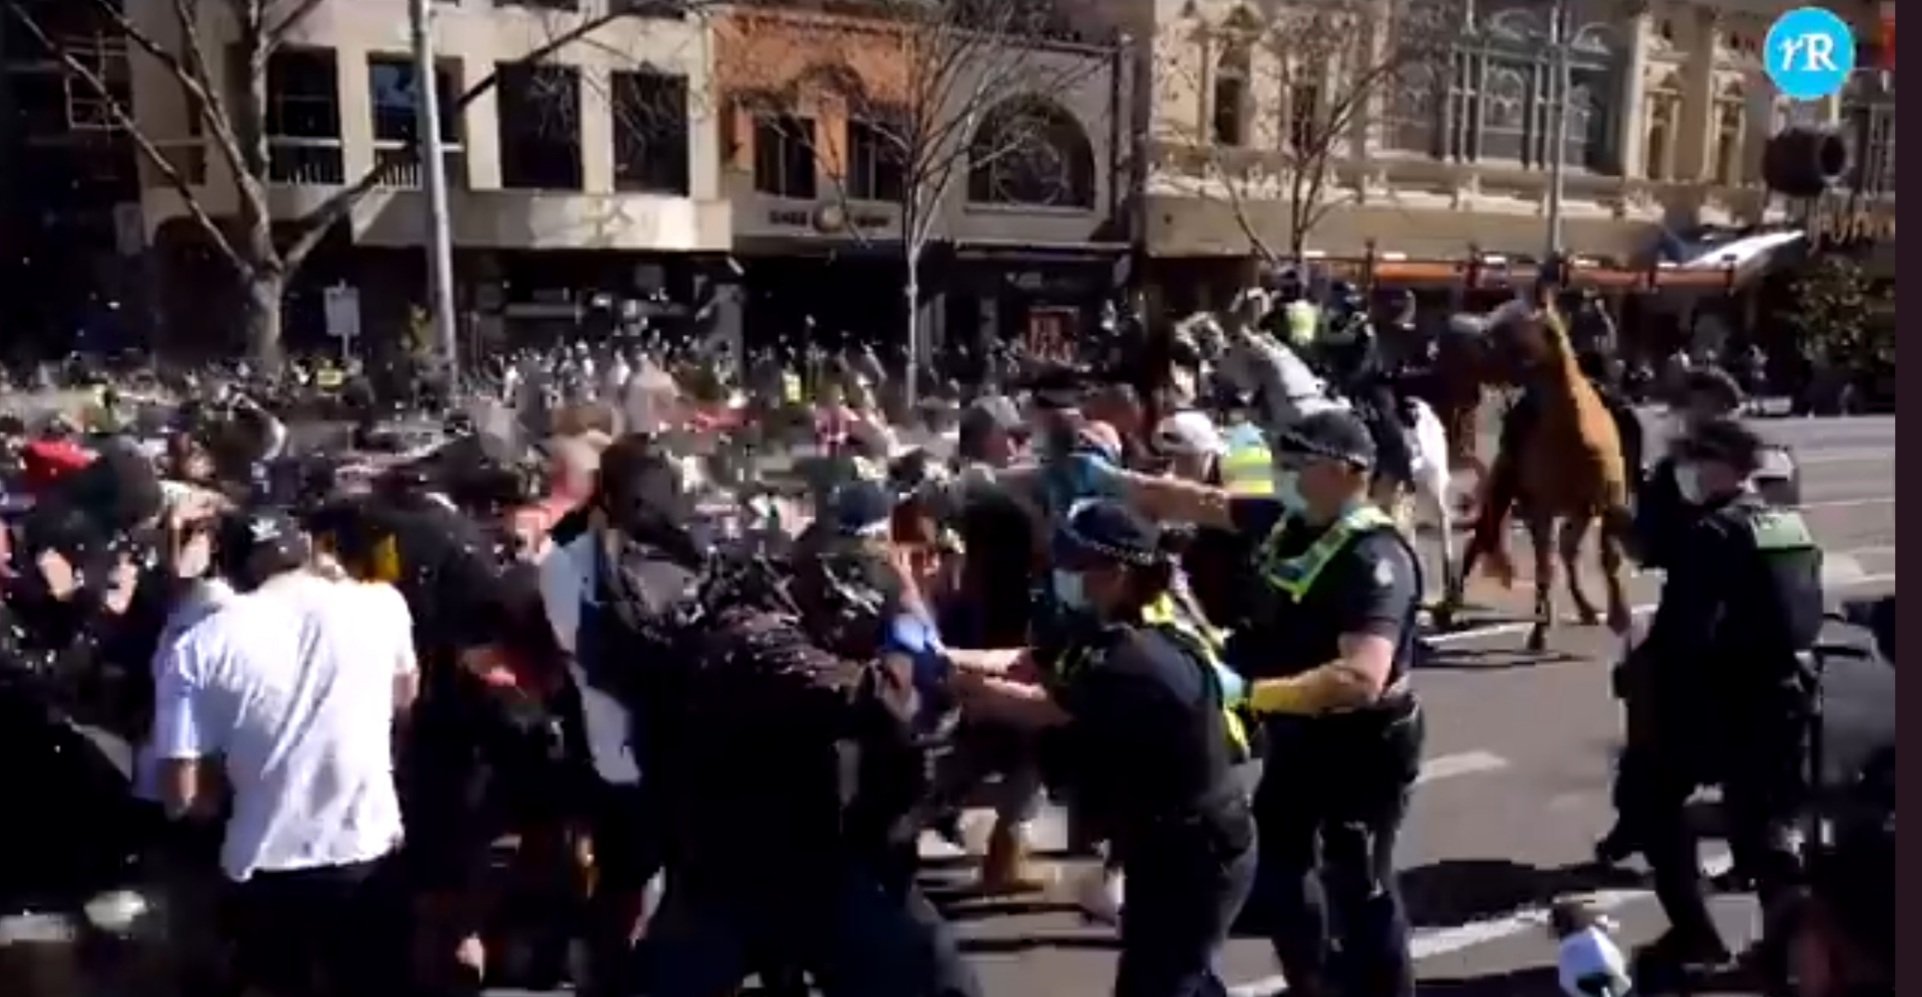 Police State Rebellion: Hundreds Arrested as Chaos Breaks Out in Australia During Massive Freedom Protests; Crowd Breaks Through Barricades – Video